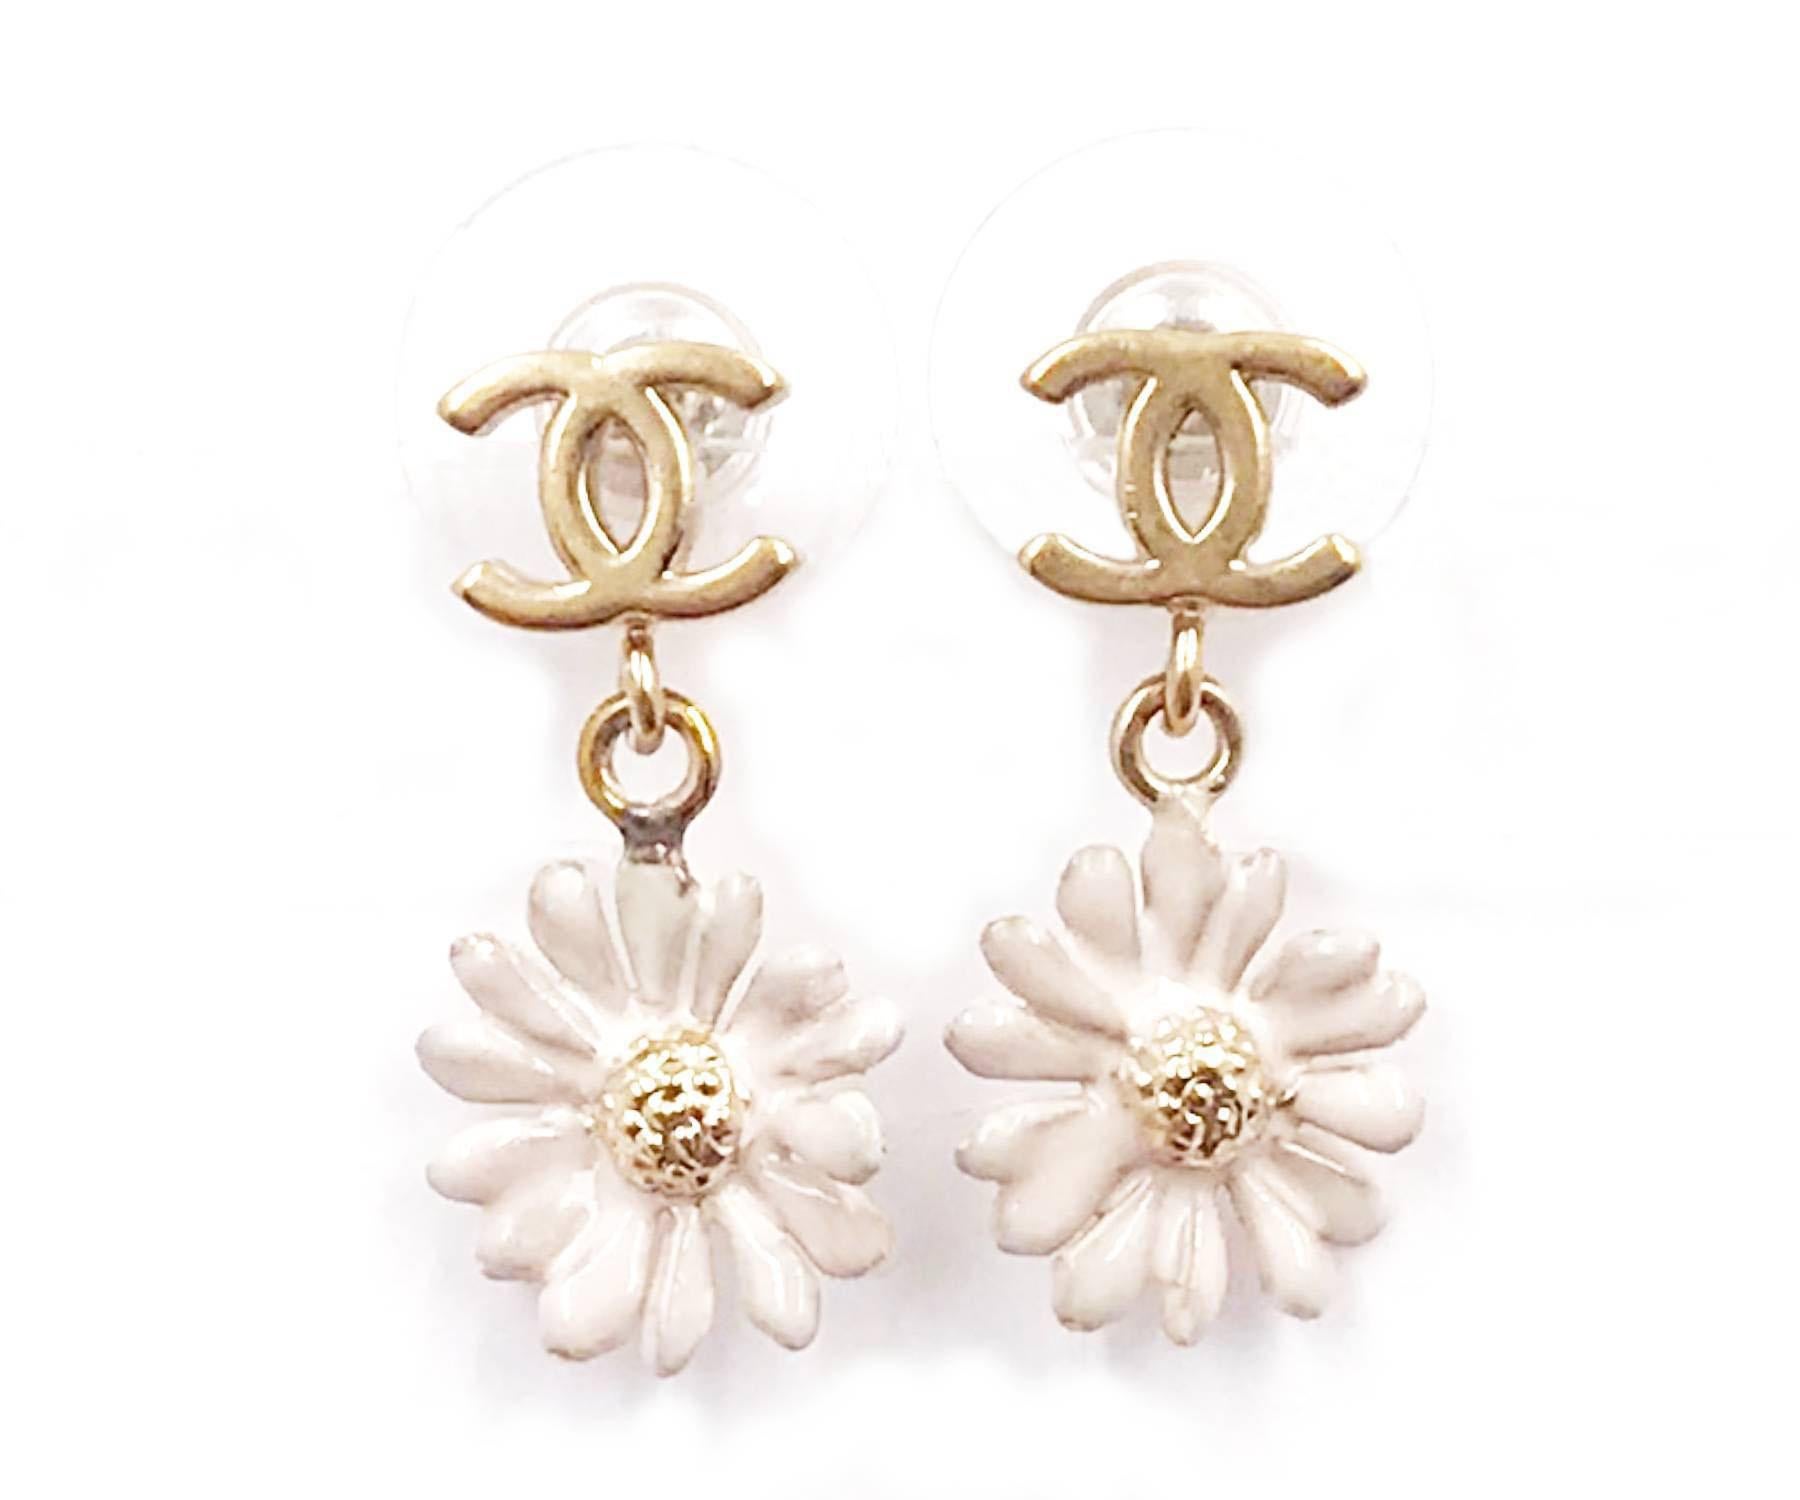 Chanel Gold CC White Daisy Small Piercing Earrings

*Marked 10
*Made in Italy
*Comes with the original dustbag

-Approximately 0.45